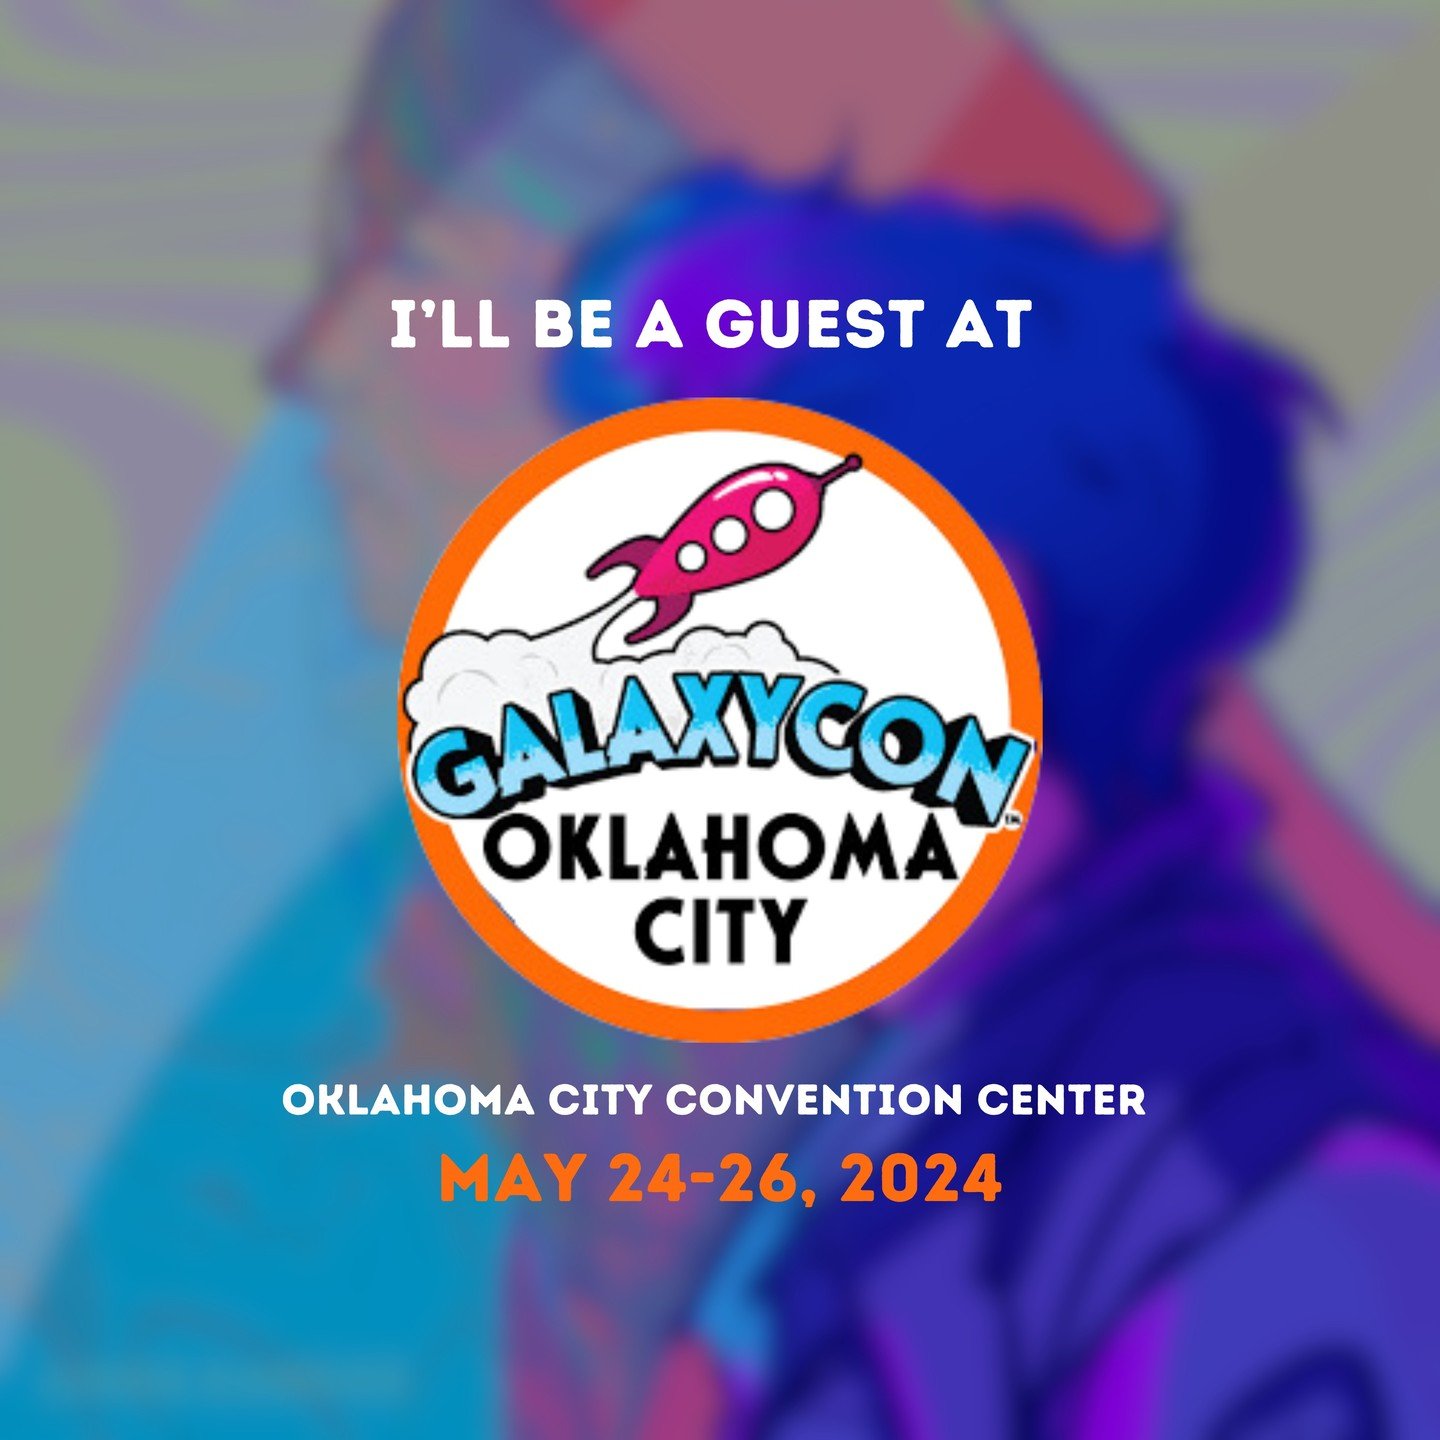 Super excited to see the folks at Galaxy Con @galaxyconoklahomacity again, and to be visiting Oklahoma for the first time ever! What should I do when I am there?! Any sights I should focus on? ANYWAY! Excited to see you all, I will have tons of books